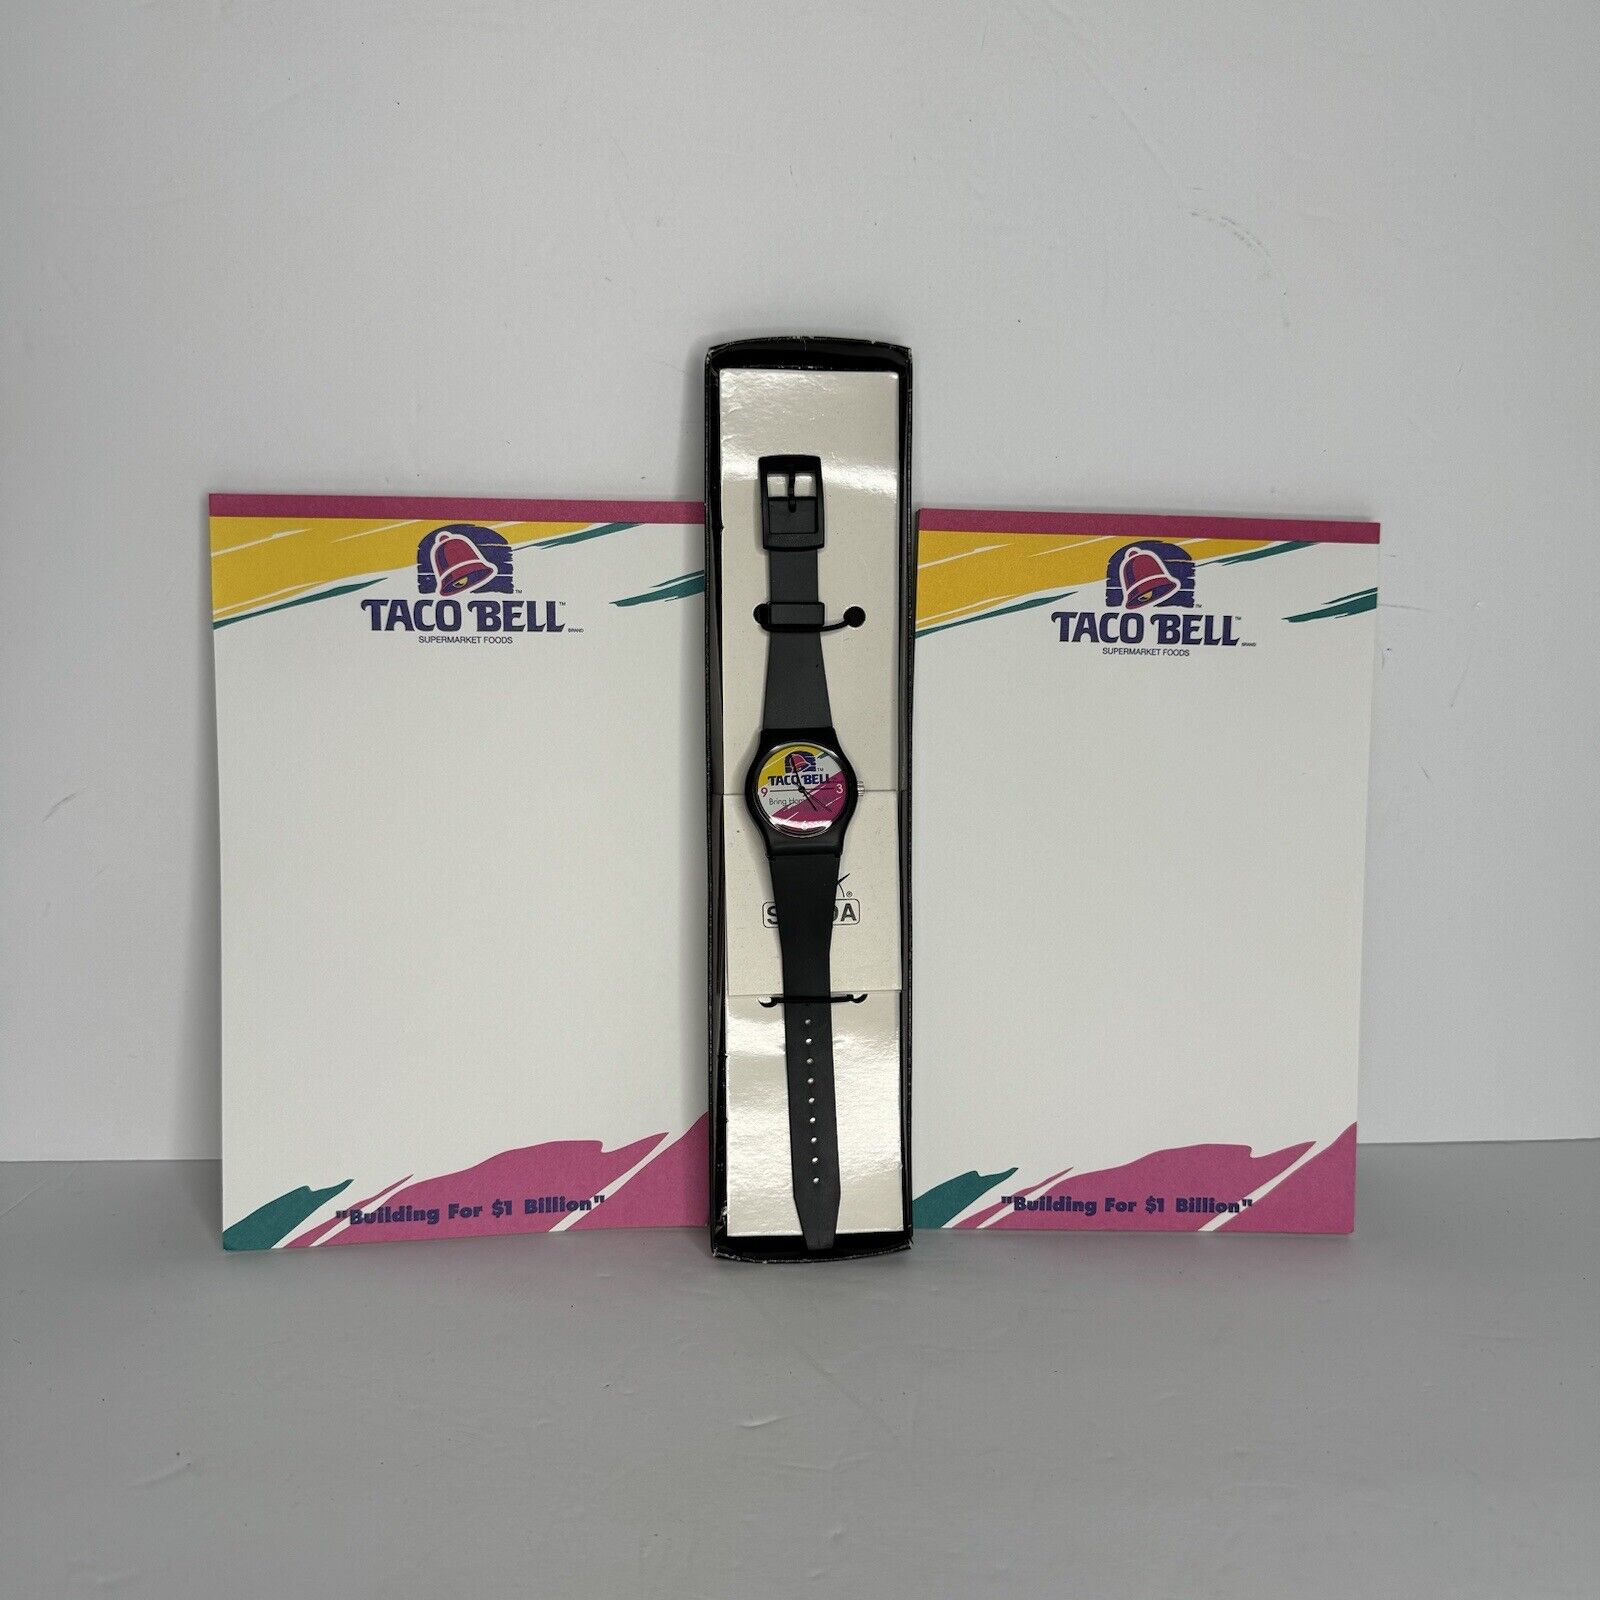 Taco Bell Vintage New Sweda Watch and Two Notepads Franchise Swag 1992-1994